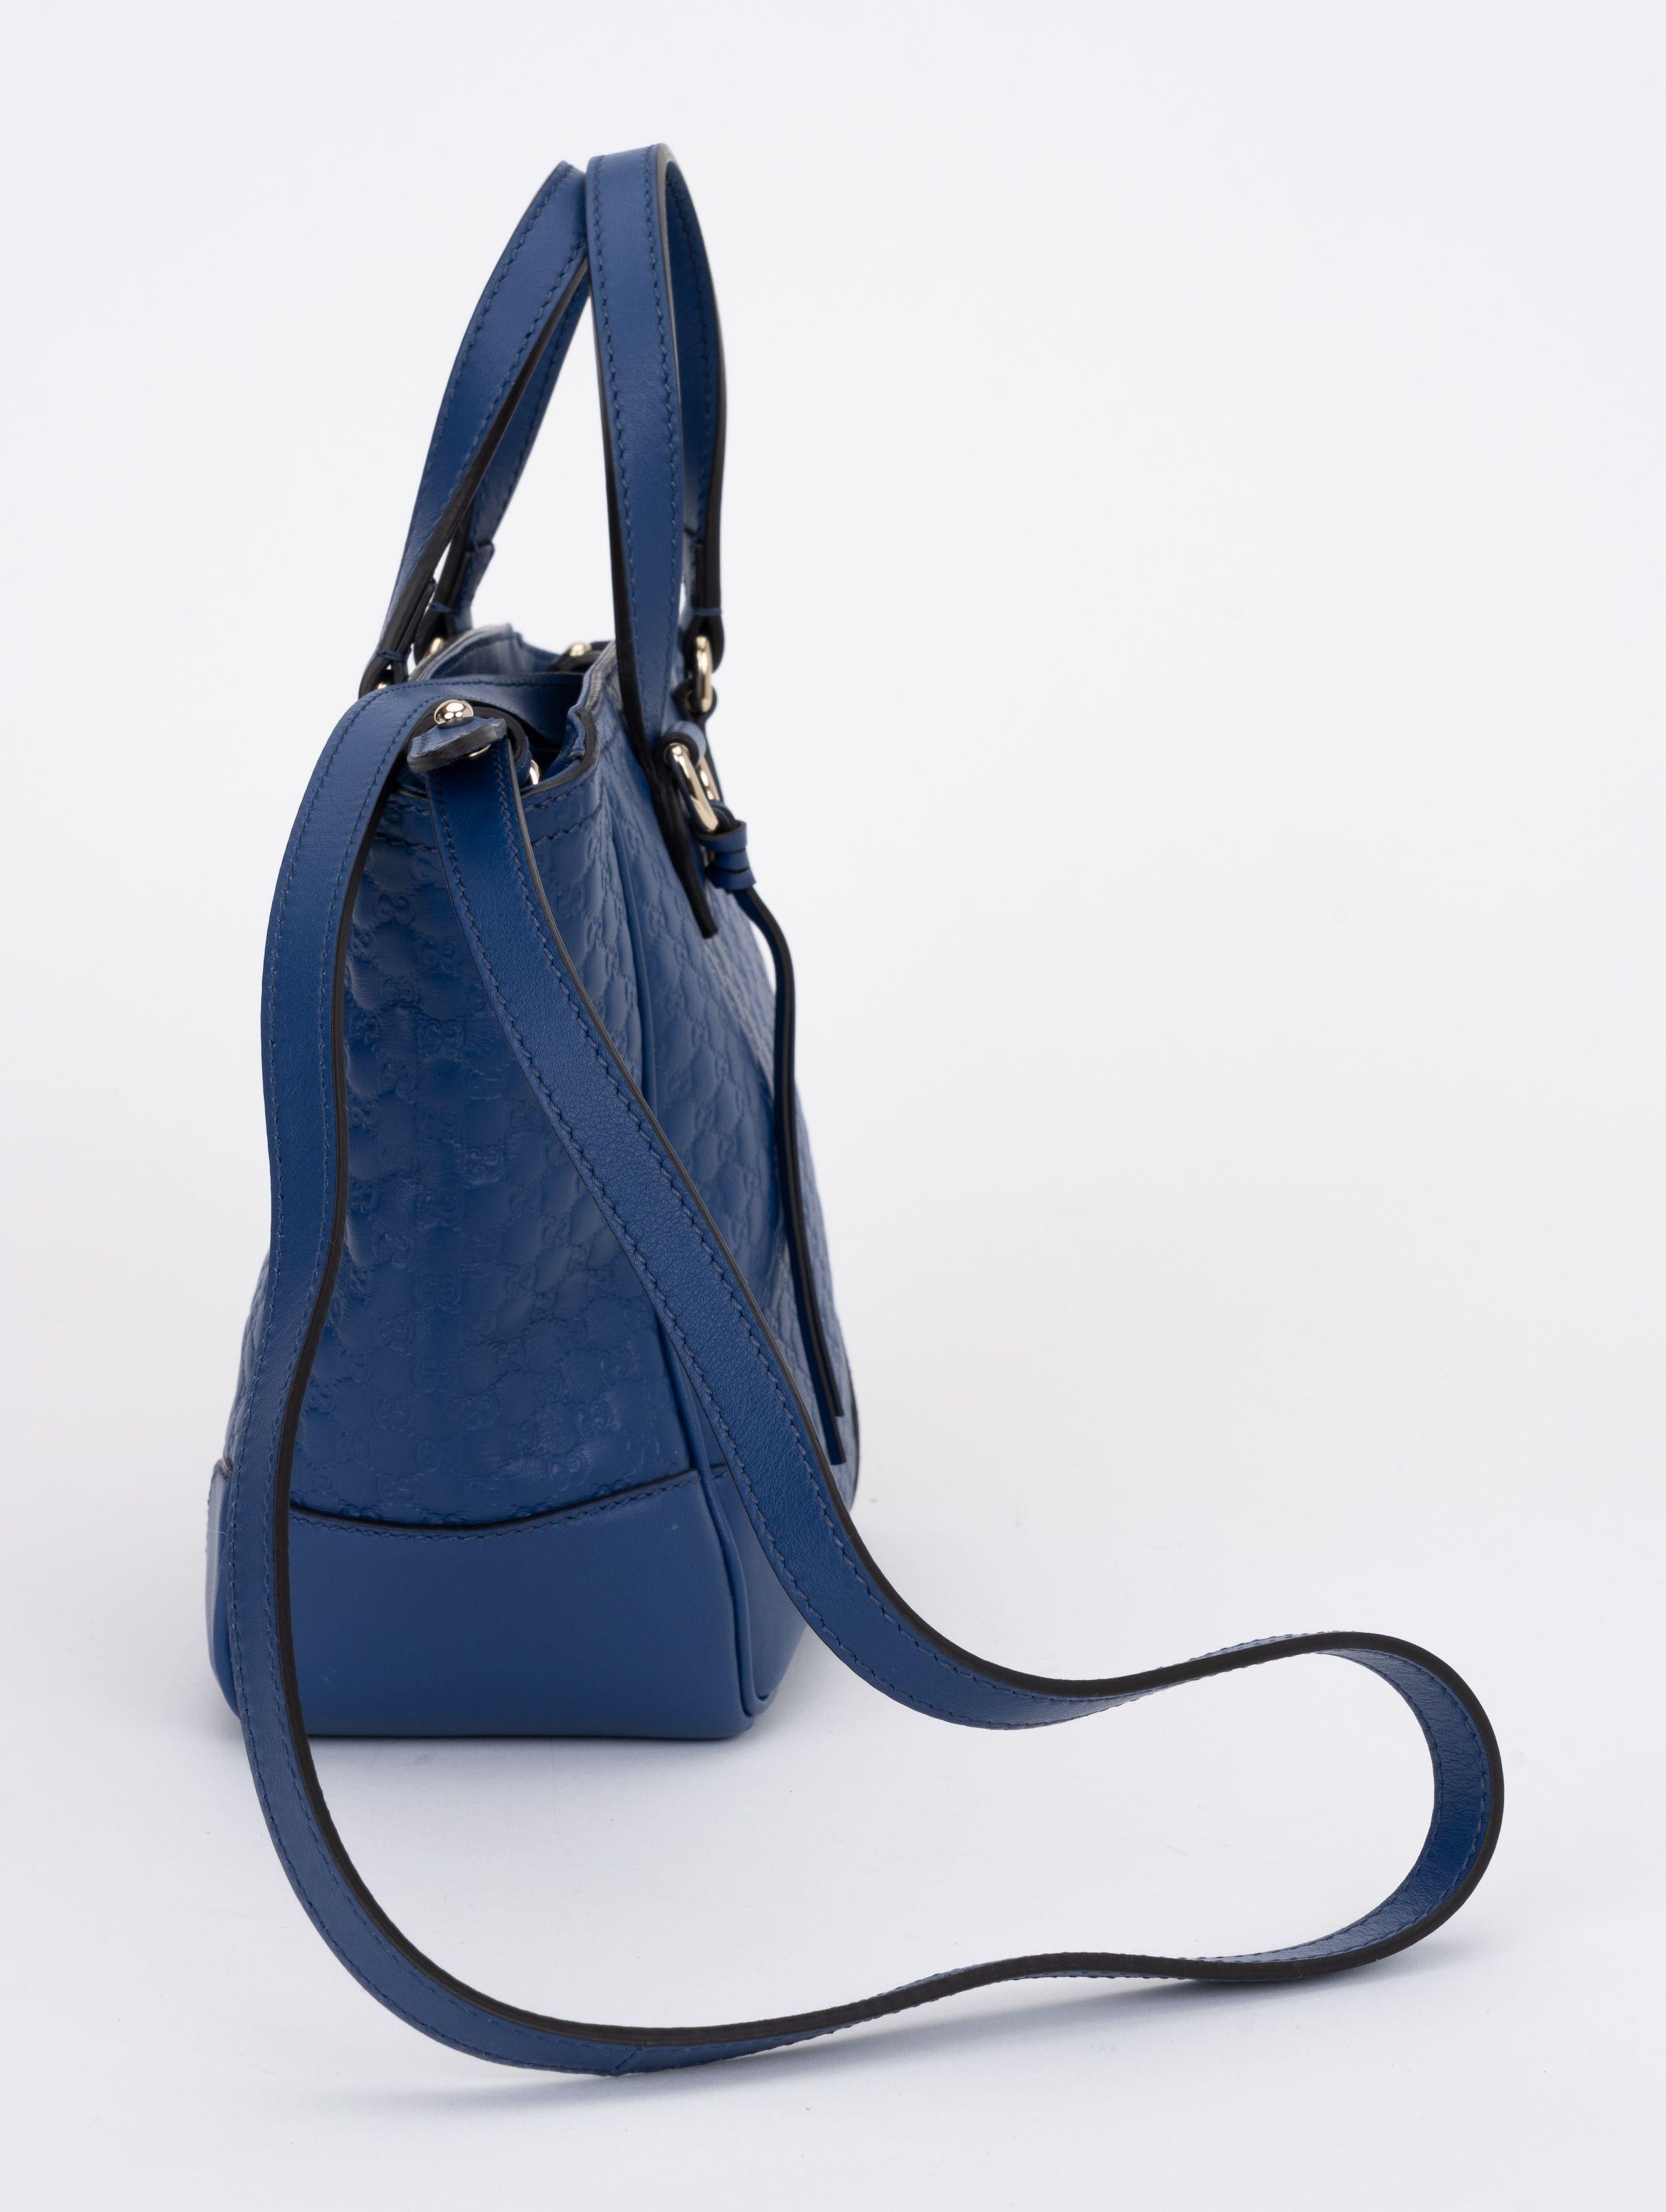 Gucci New Blue Logo Leather 2 Way Bag In New Condition For Sale In West Hollywood, CA